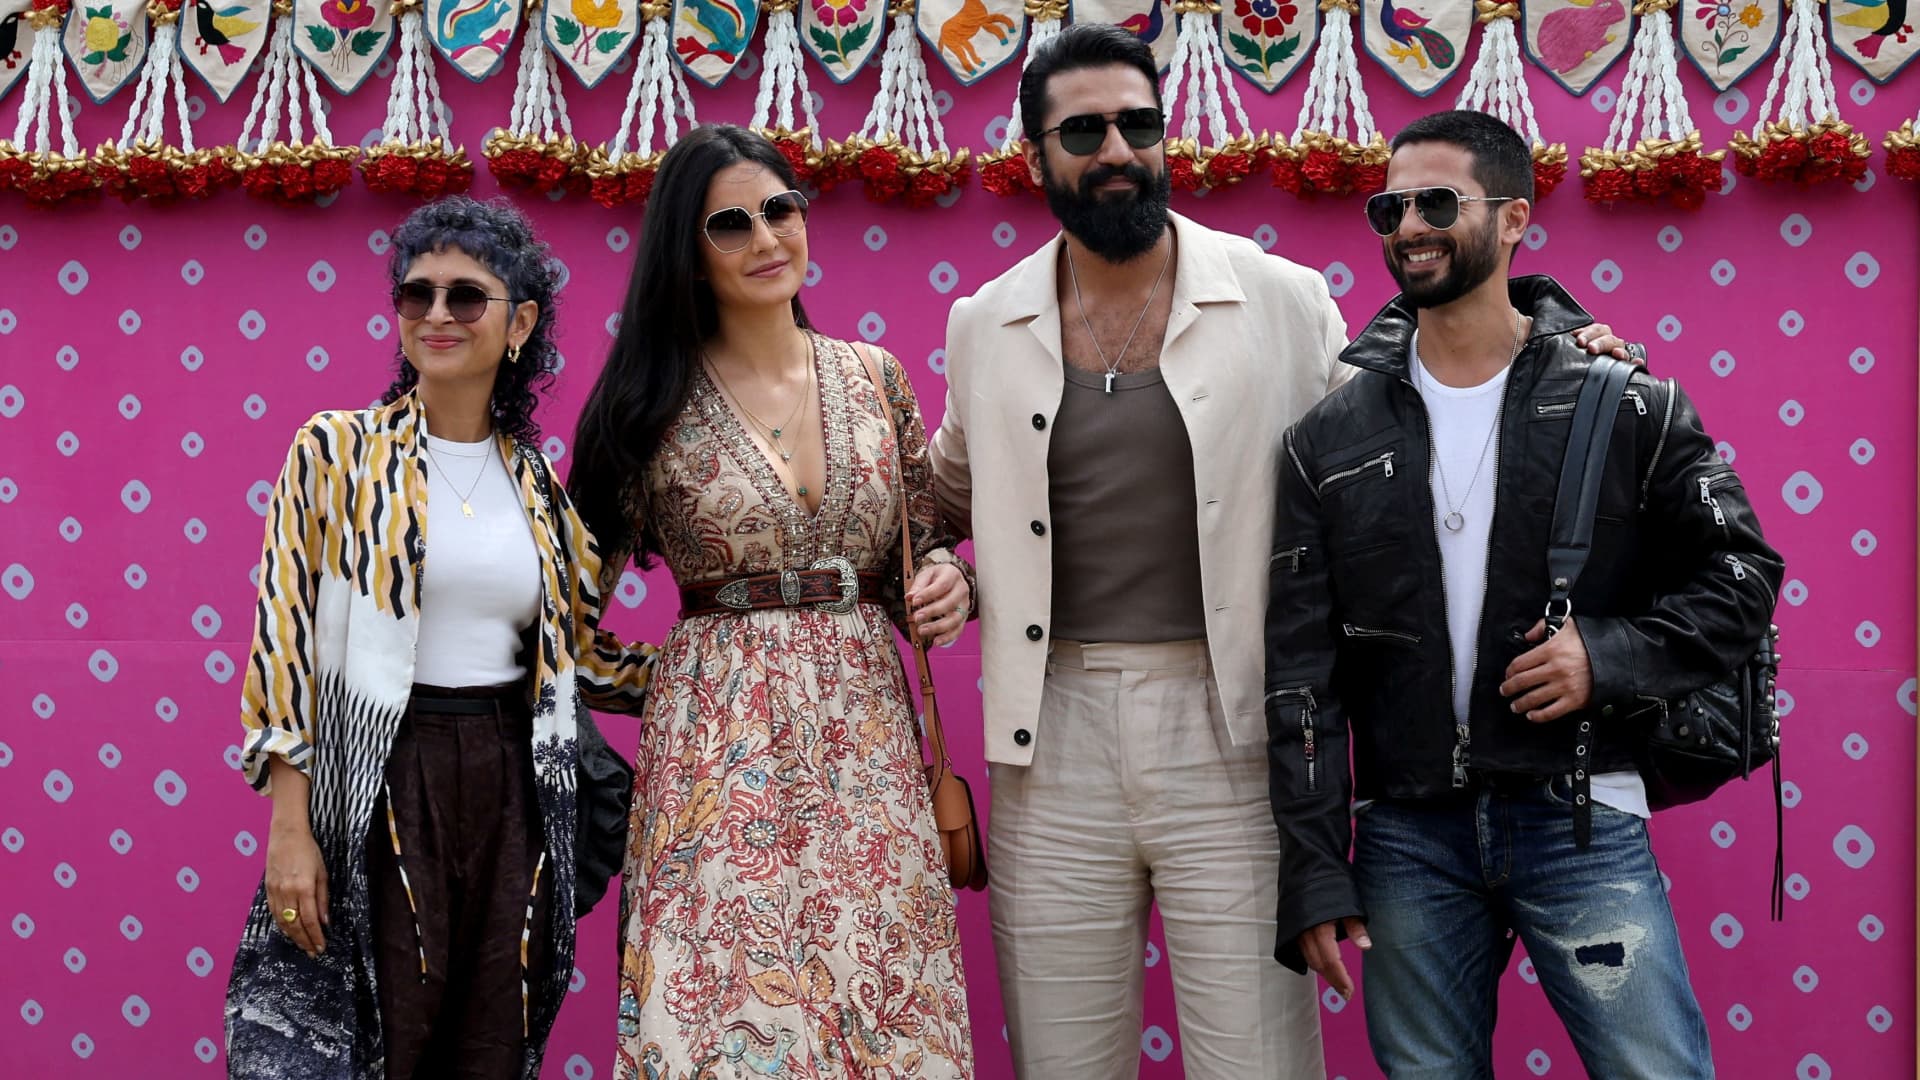 Filmmaker Kiran Rao; actor Vicky Kaushal and his wife, actor Katrina Kaif; and actor Shahid Kapoor arrive to attend the pre-wedding celebrations of Anant Ambani and Radhika Merchant in Jamnagar, Gujarat, India, on March 2, 2024.